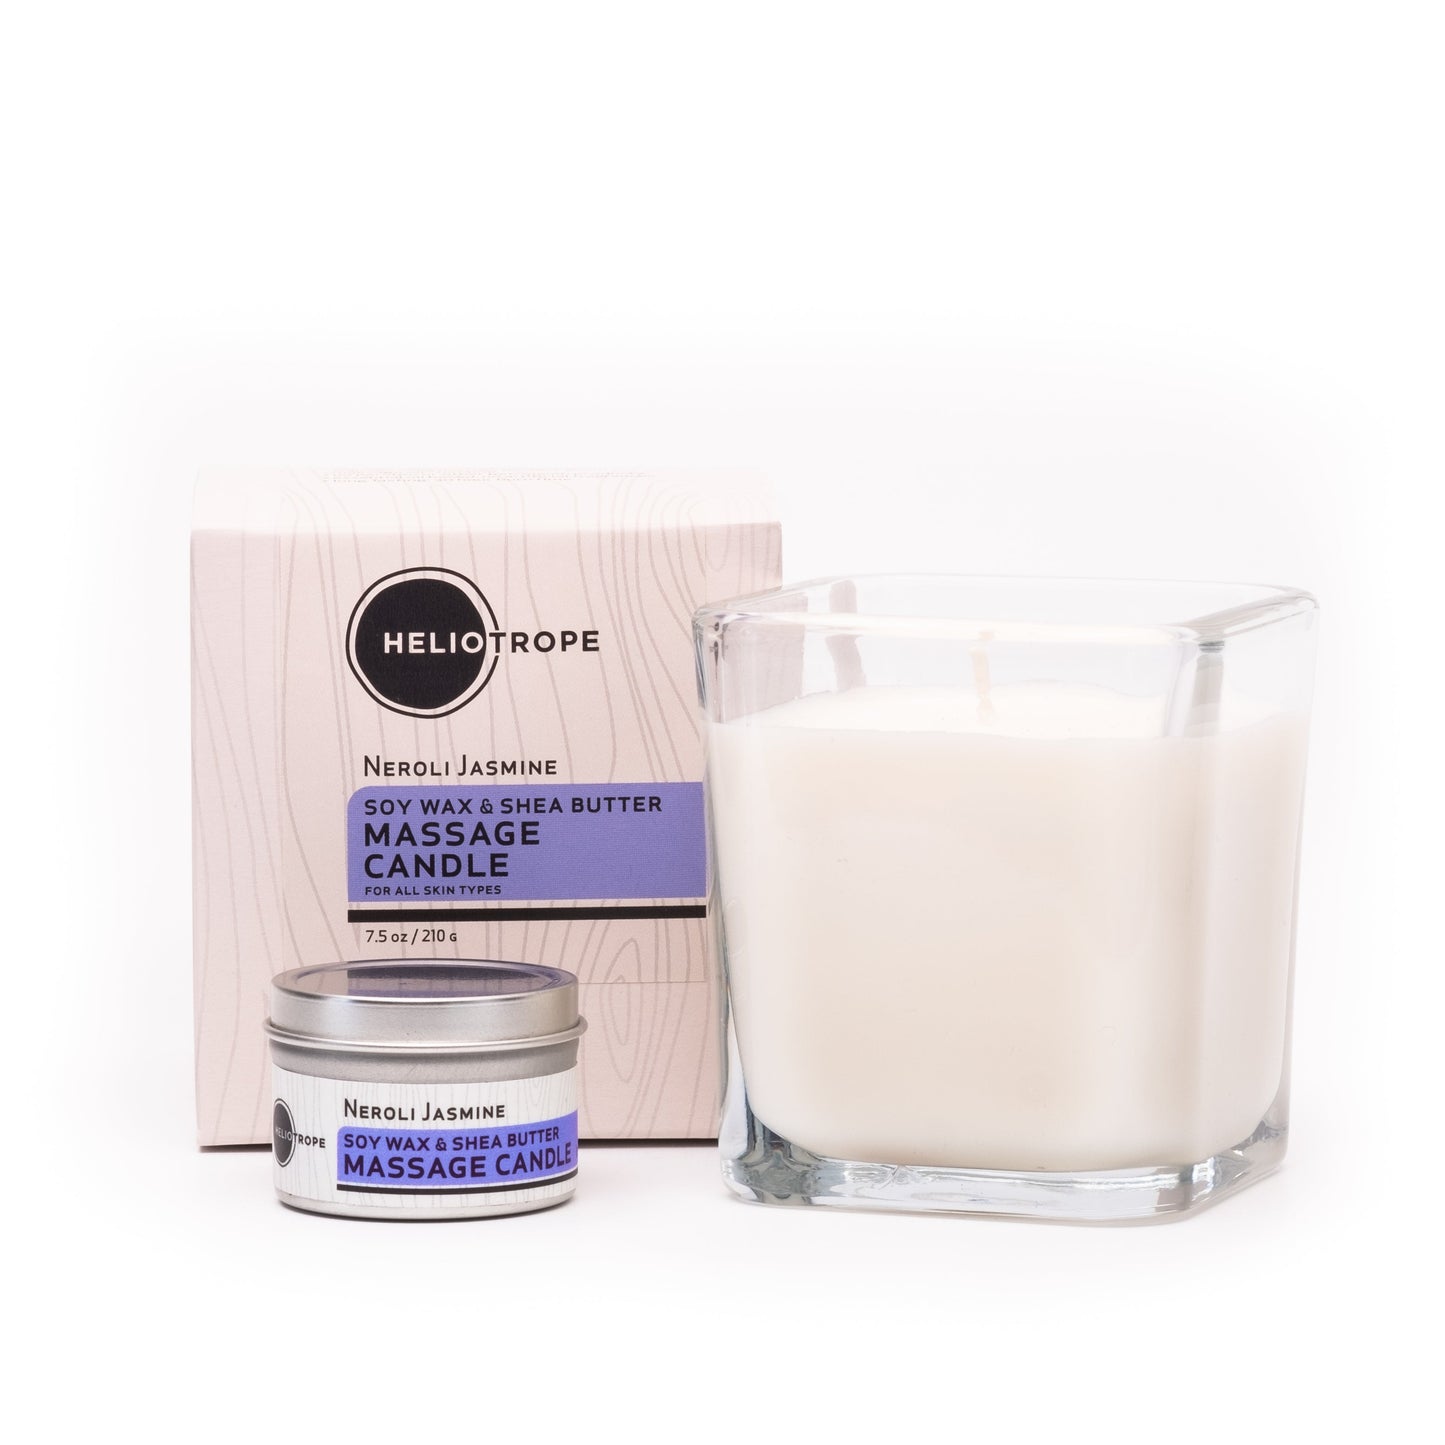 Soy Wax & Shea Butter Massage Candles - now in 3 sizes! by Heliotrope San Francisco